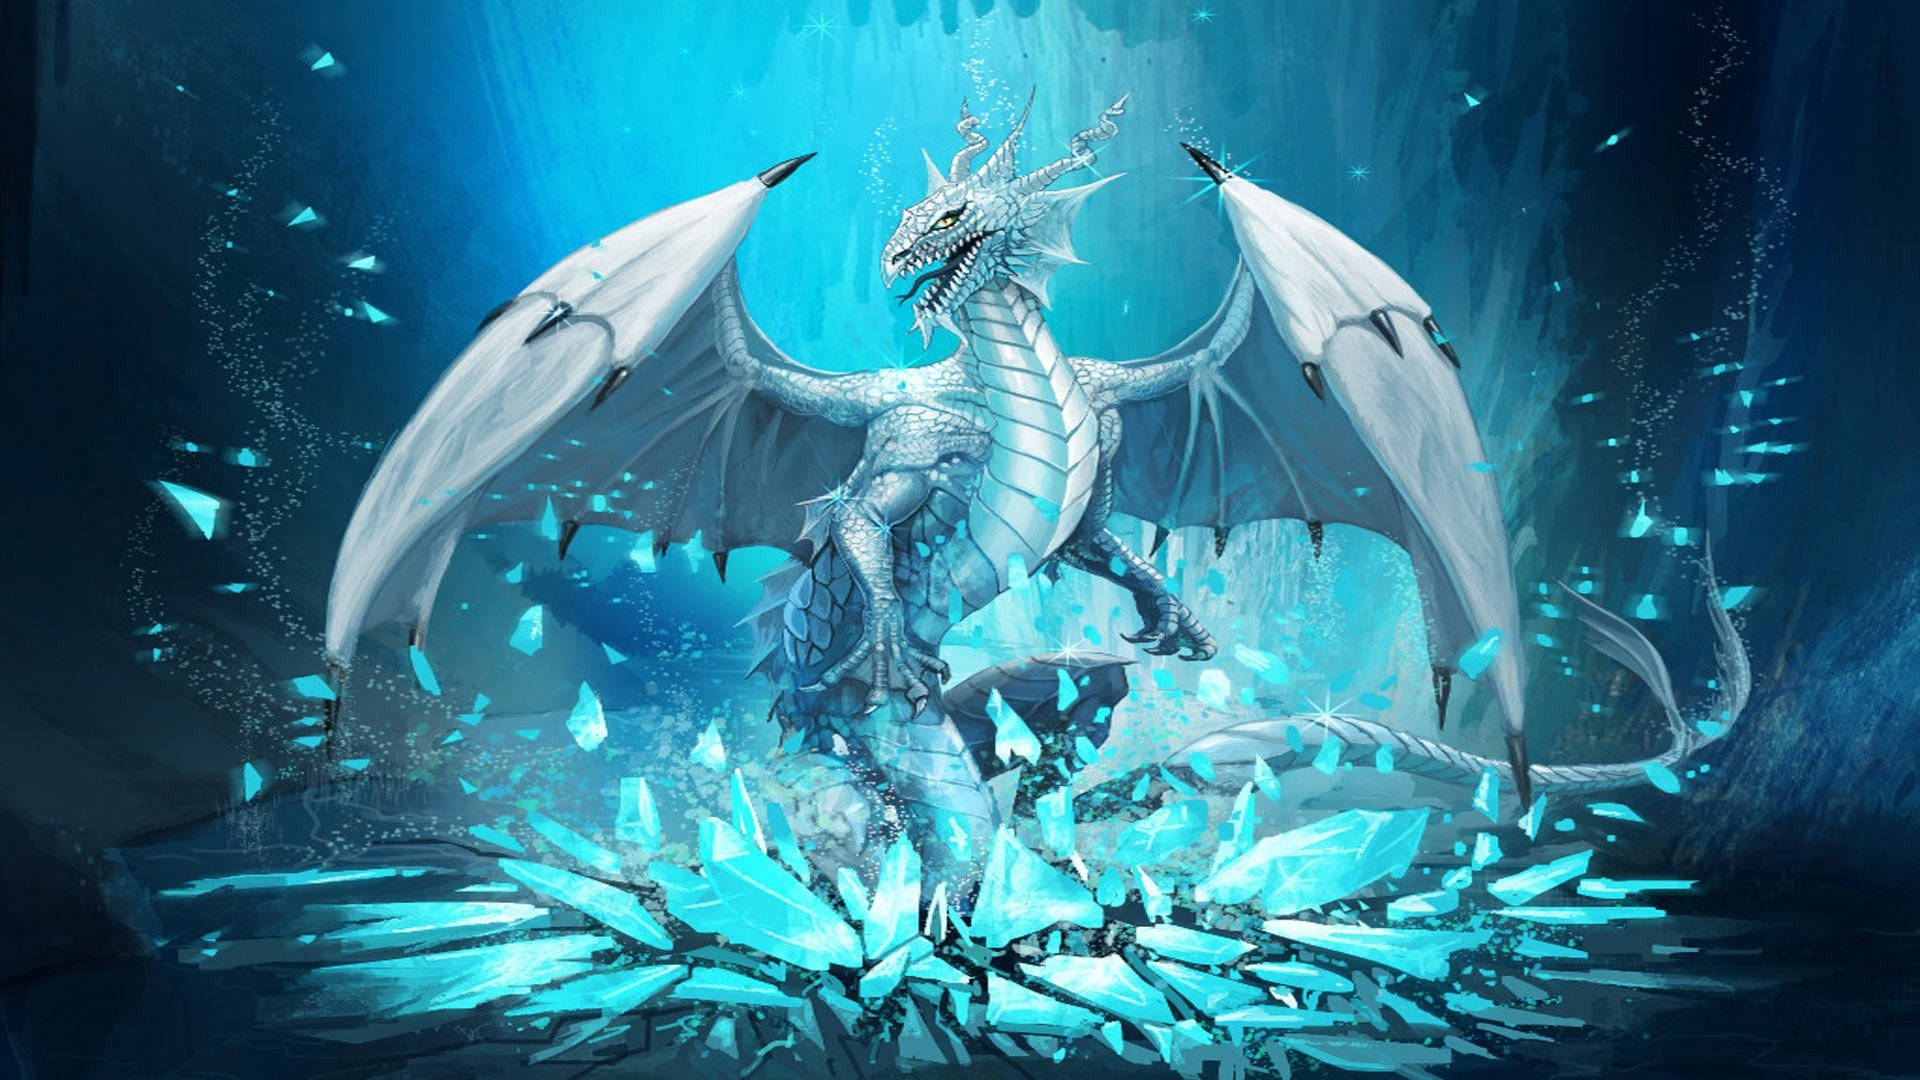 Coolest Dragon Wallpapers on WallpaperDog